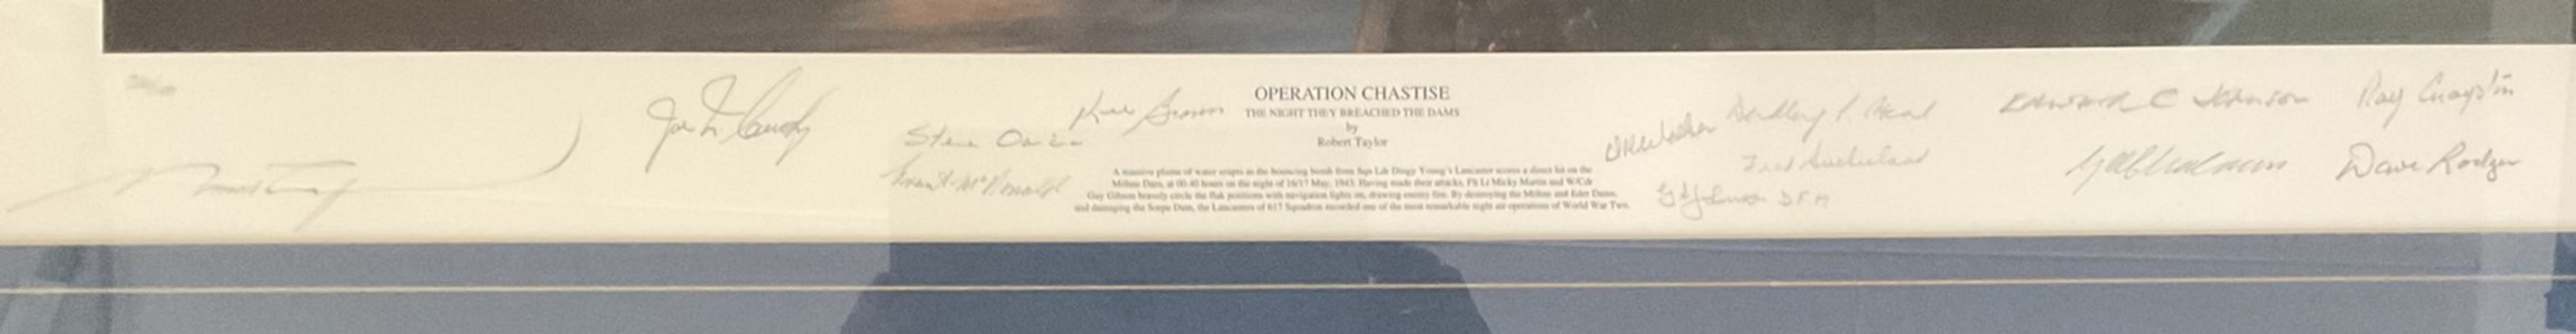 WW2 Rare Limited Edition Print Operation Chastise By Robert Taylor Carrying The Signatures Of 12 - Image 2 of 2